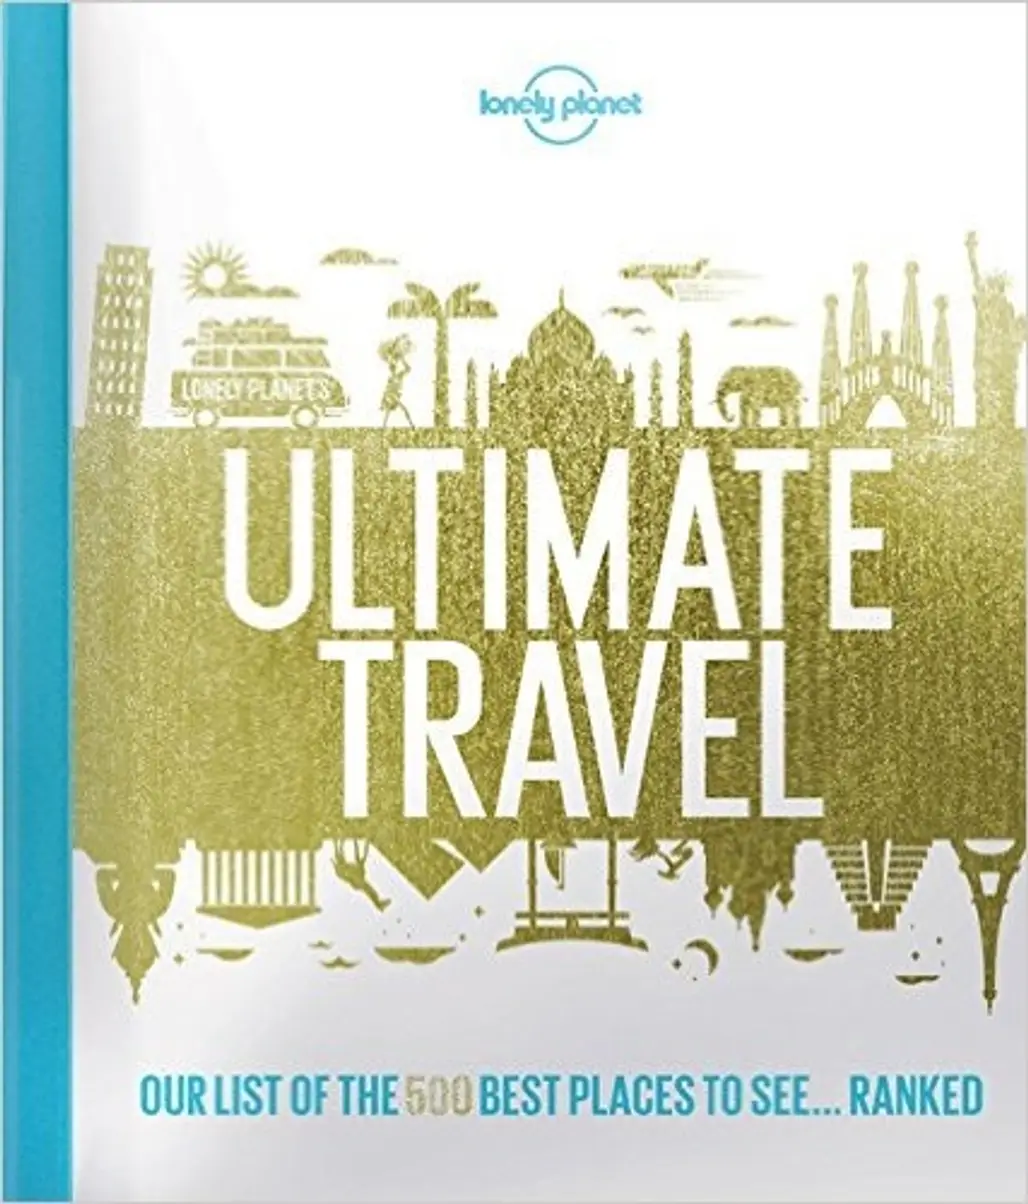 Lonely Planet,text,font,advertising,poster,